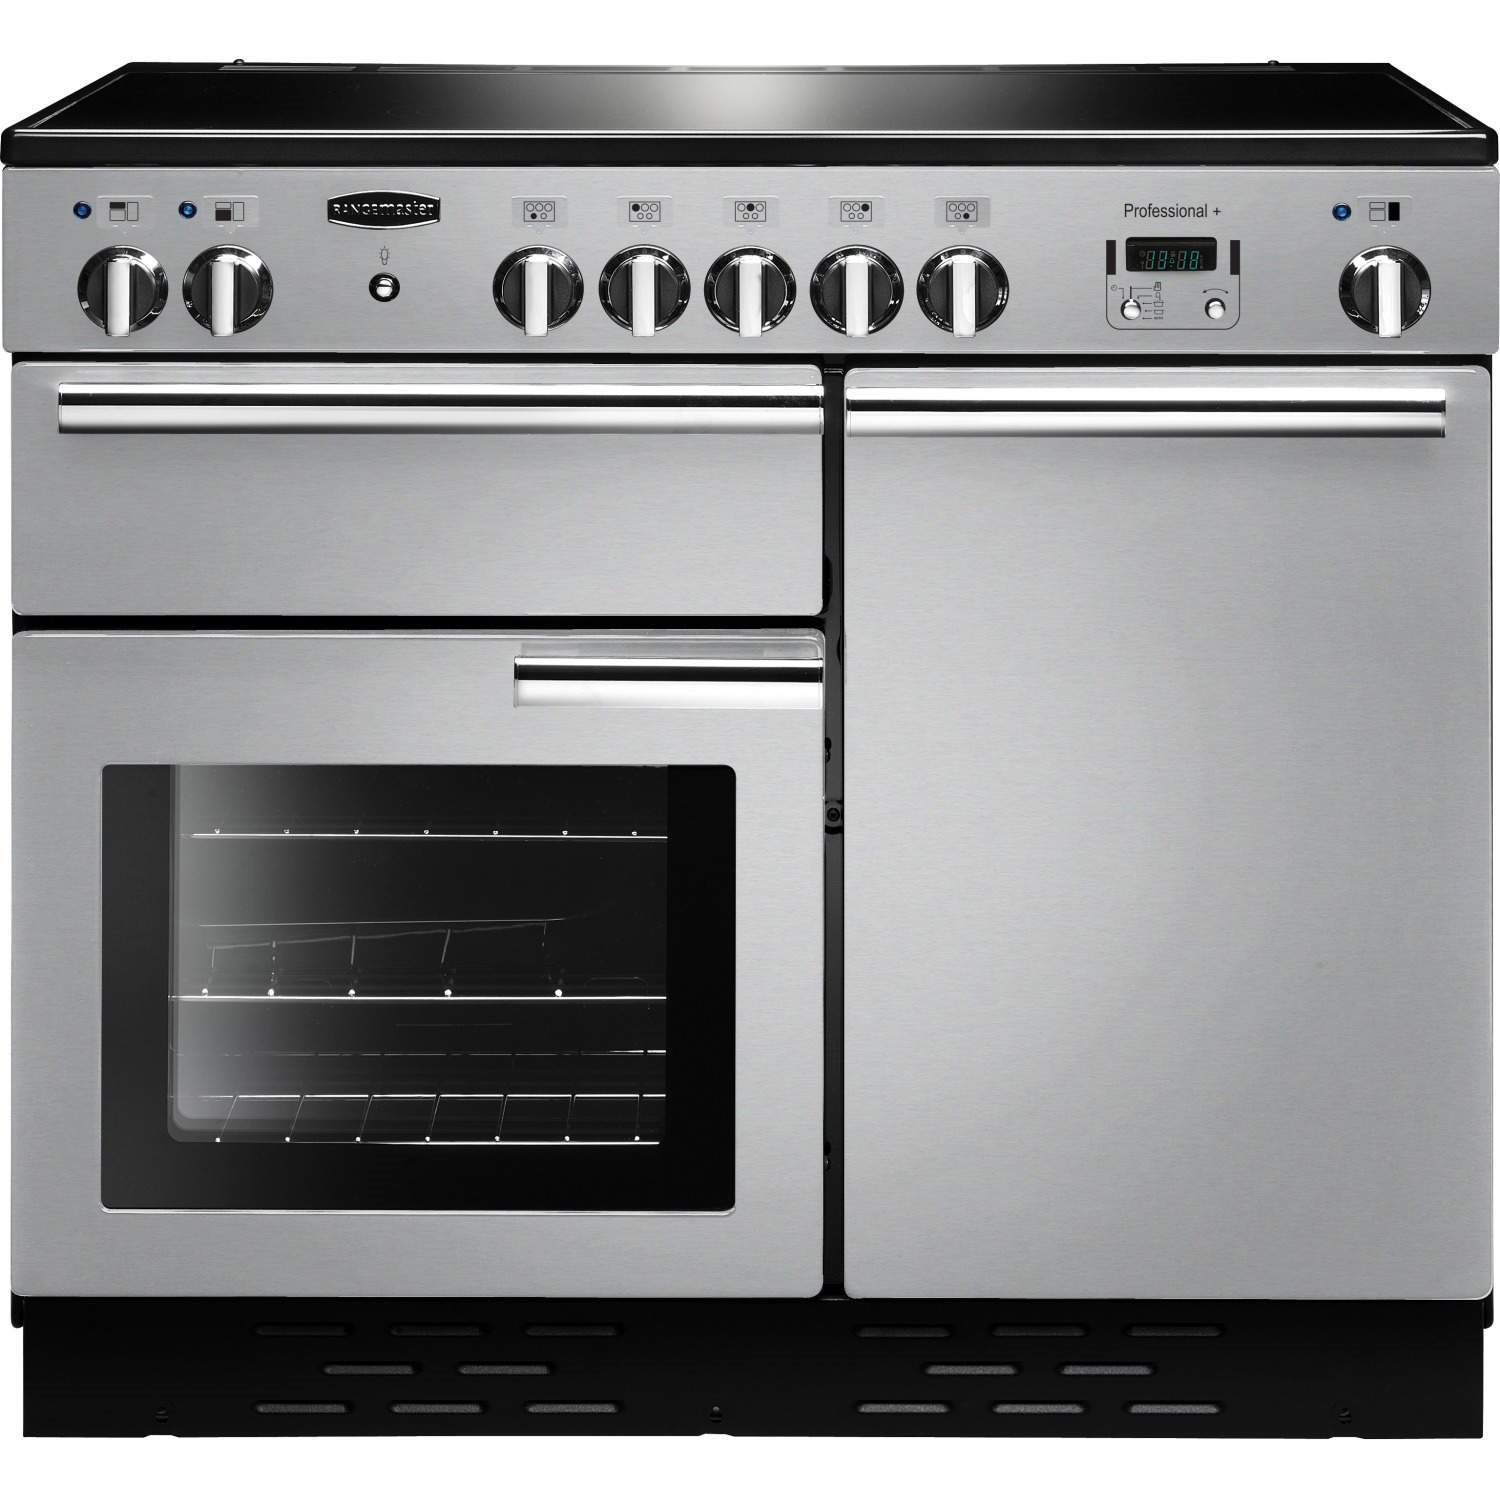 Rangemaster Professional Plus 100cm Electric Range Cooker with Induction Hob - Stainless Steel